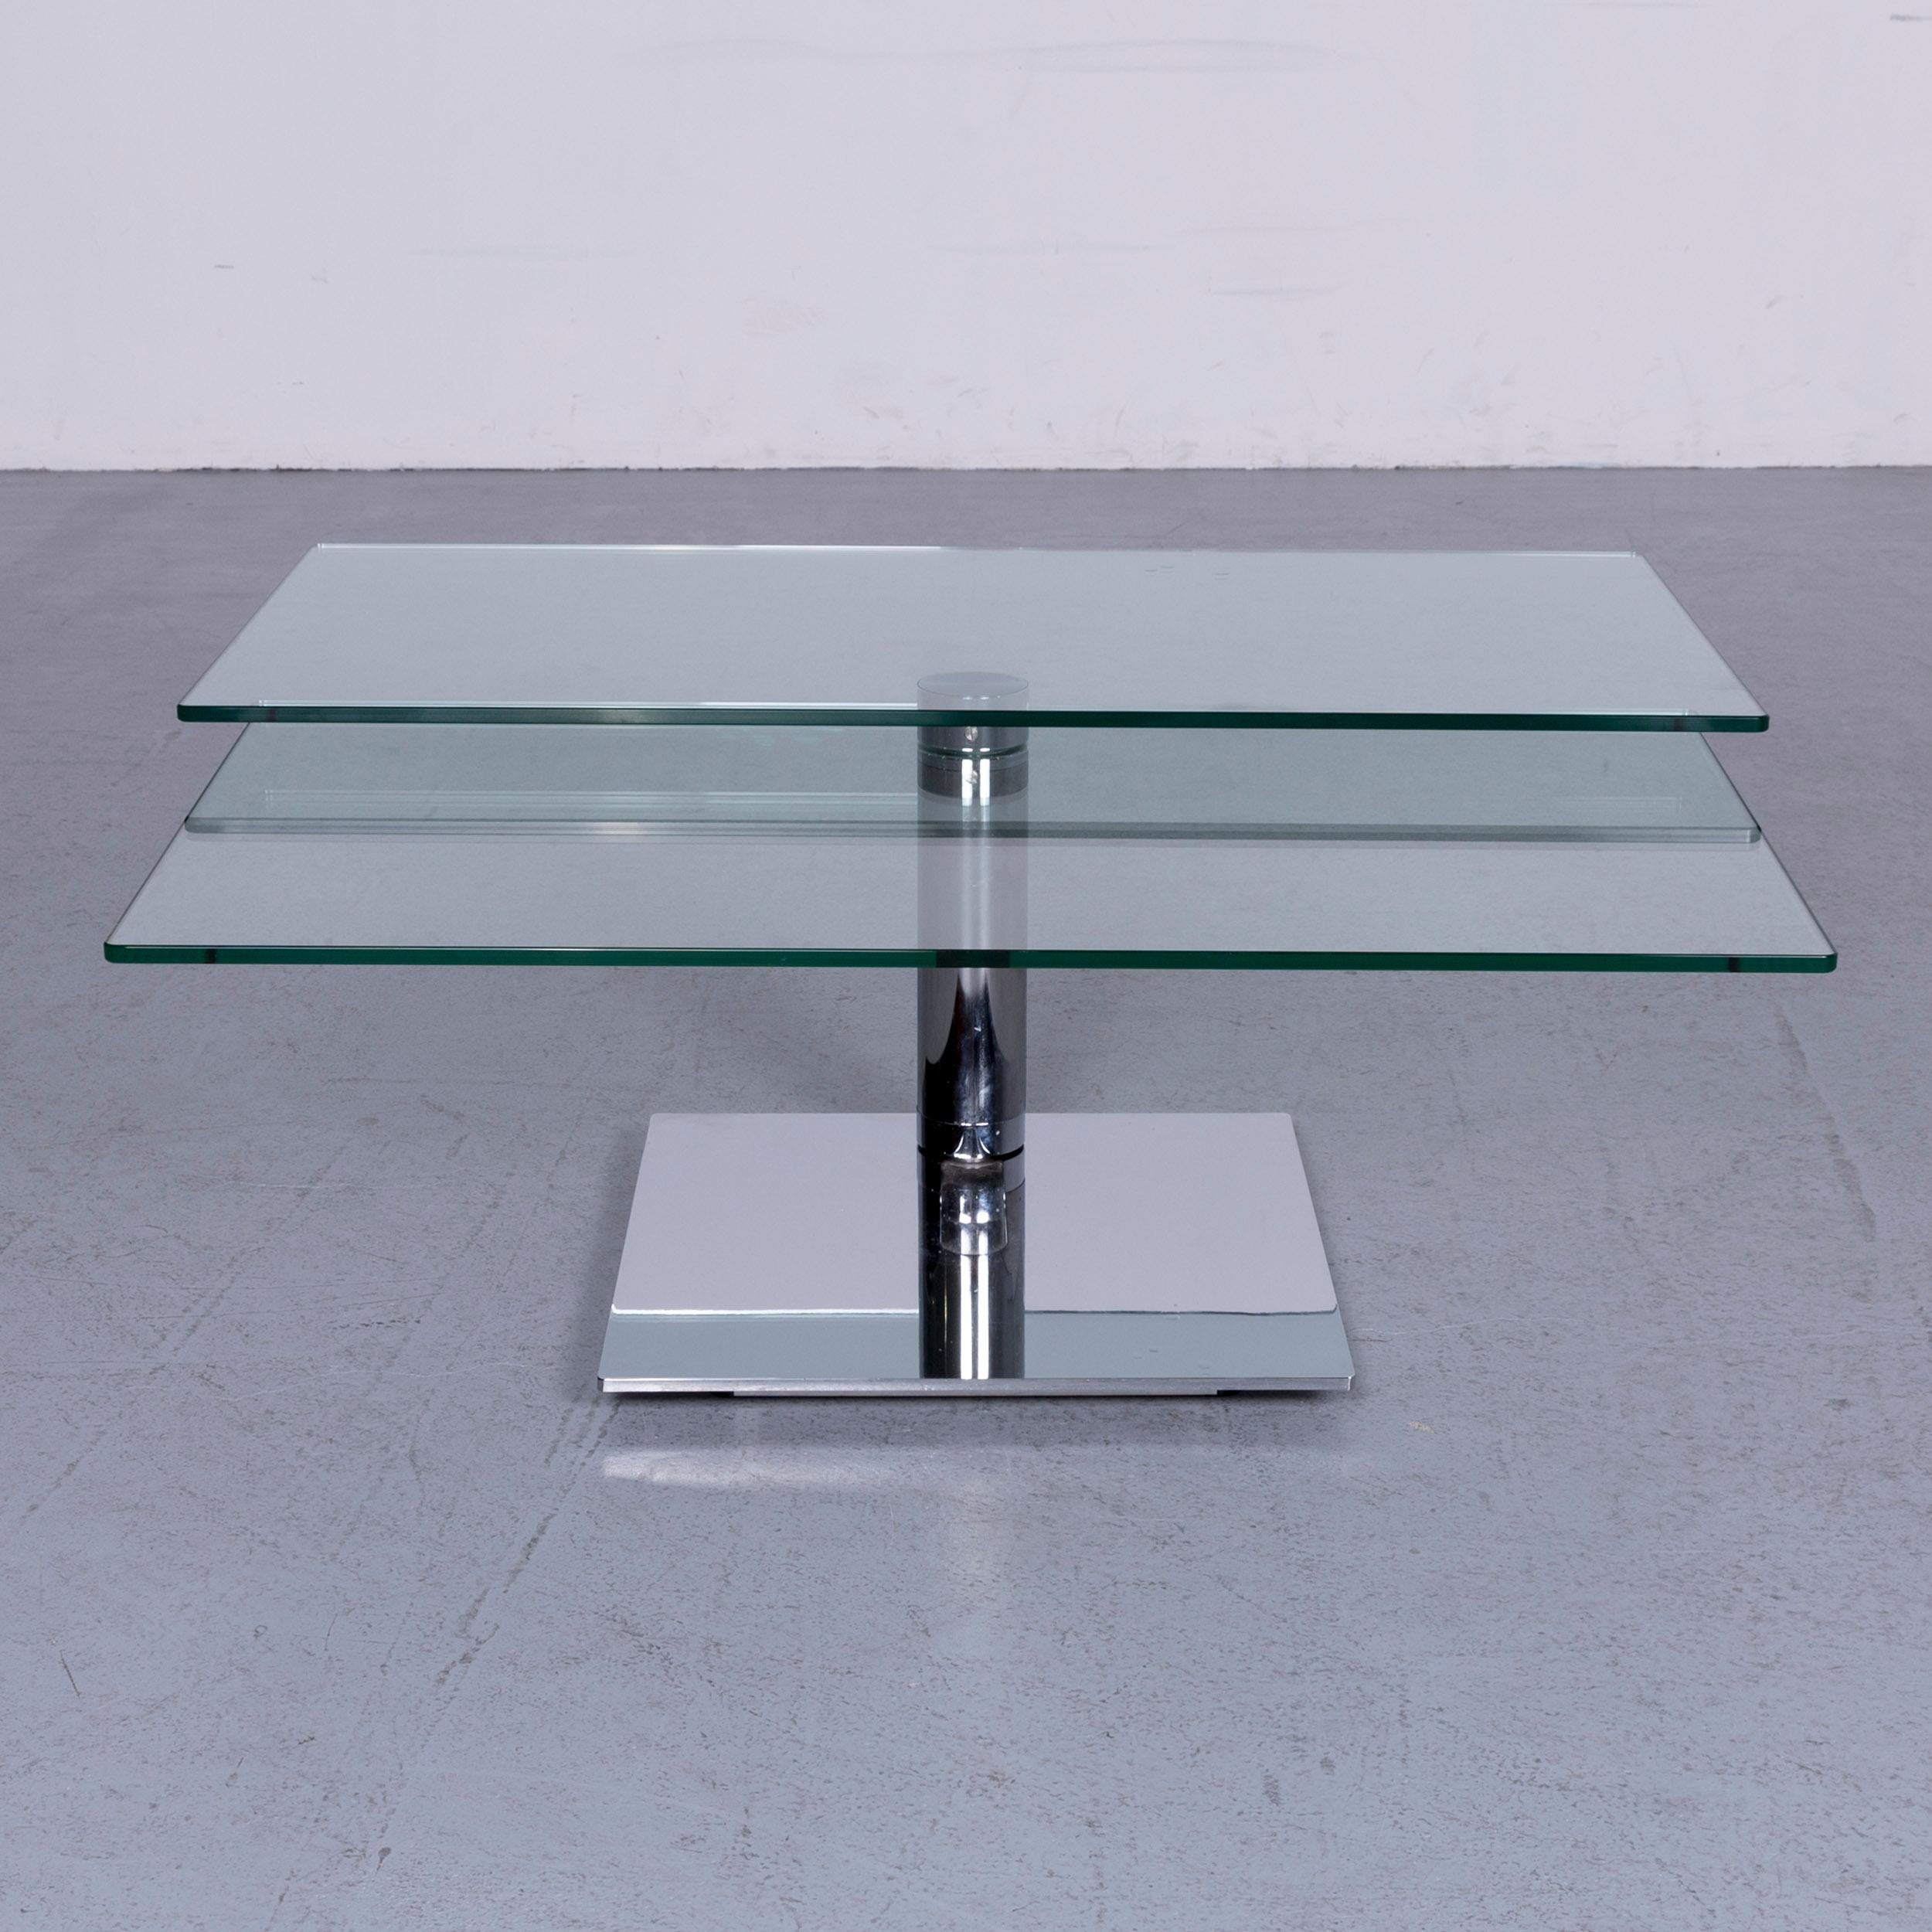 We bring to you an designer modern glass table silver chrome coffee table.






























